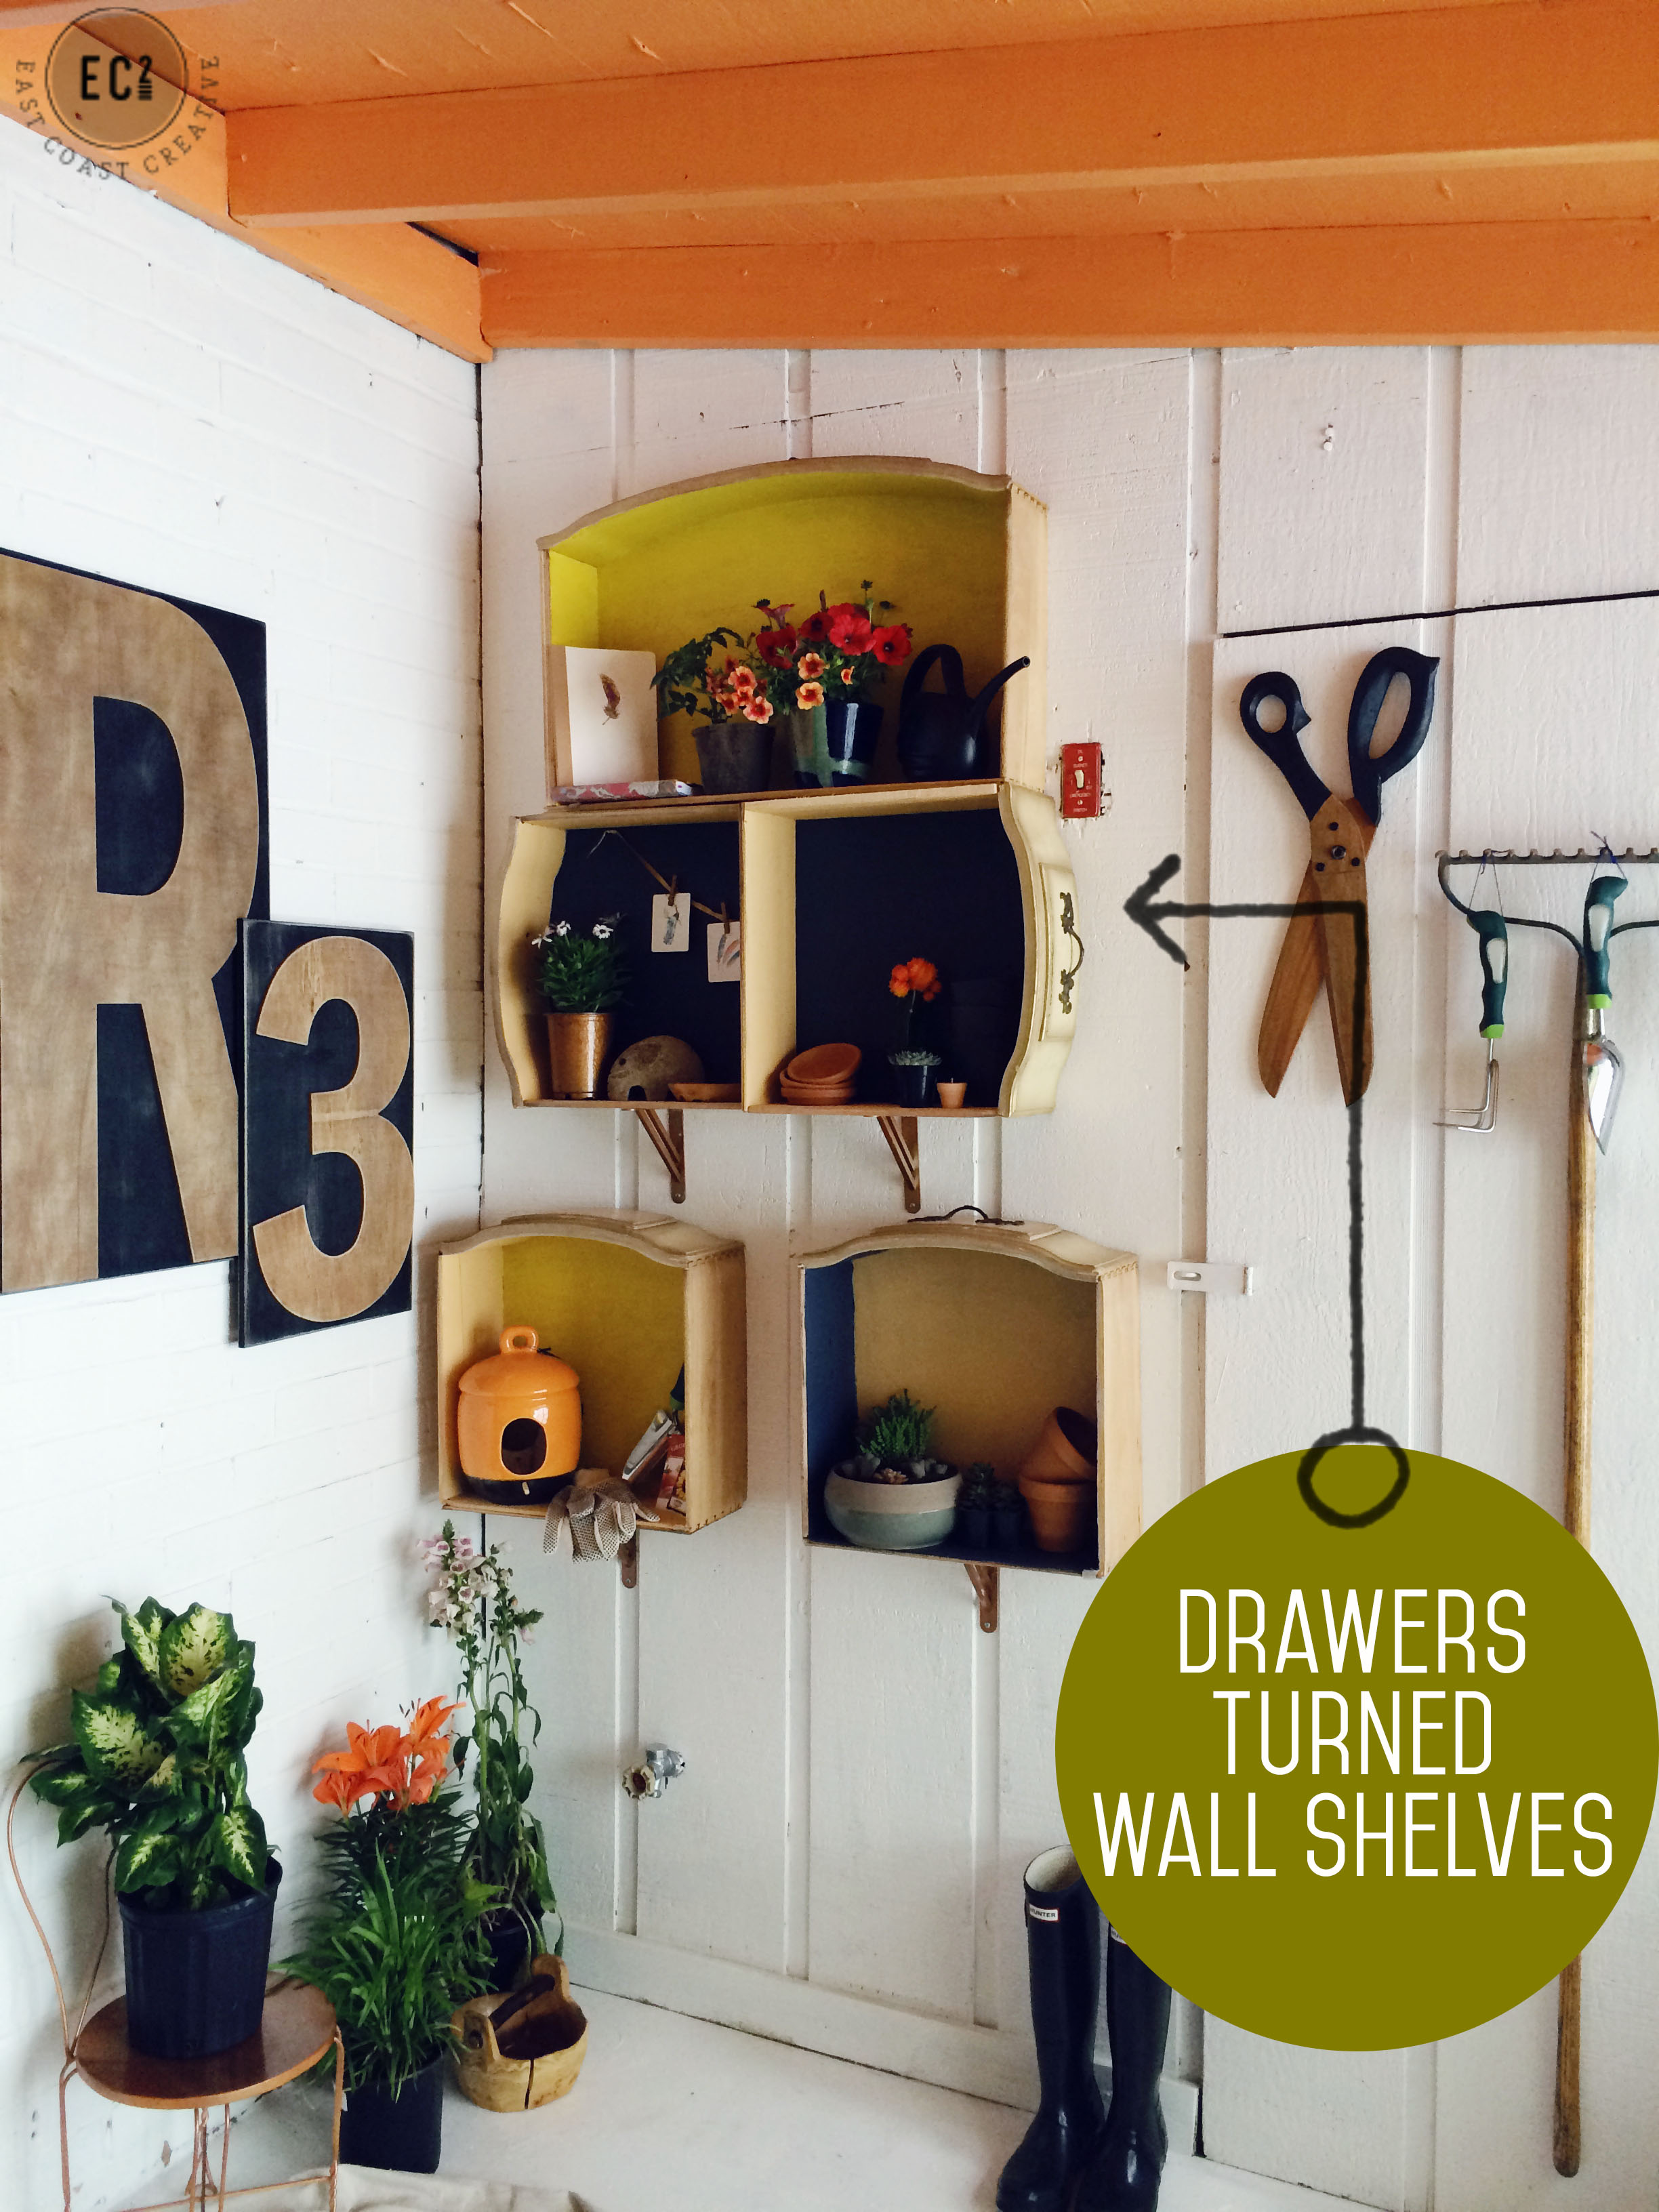 Upcycled Wall Shelves from Drawers East Coast Creative Blog